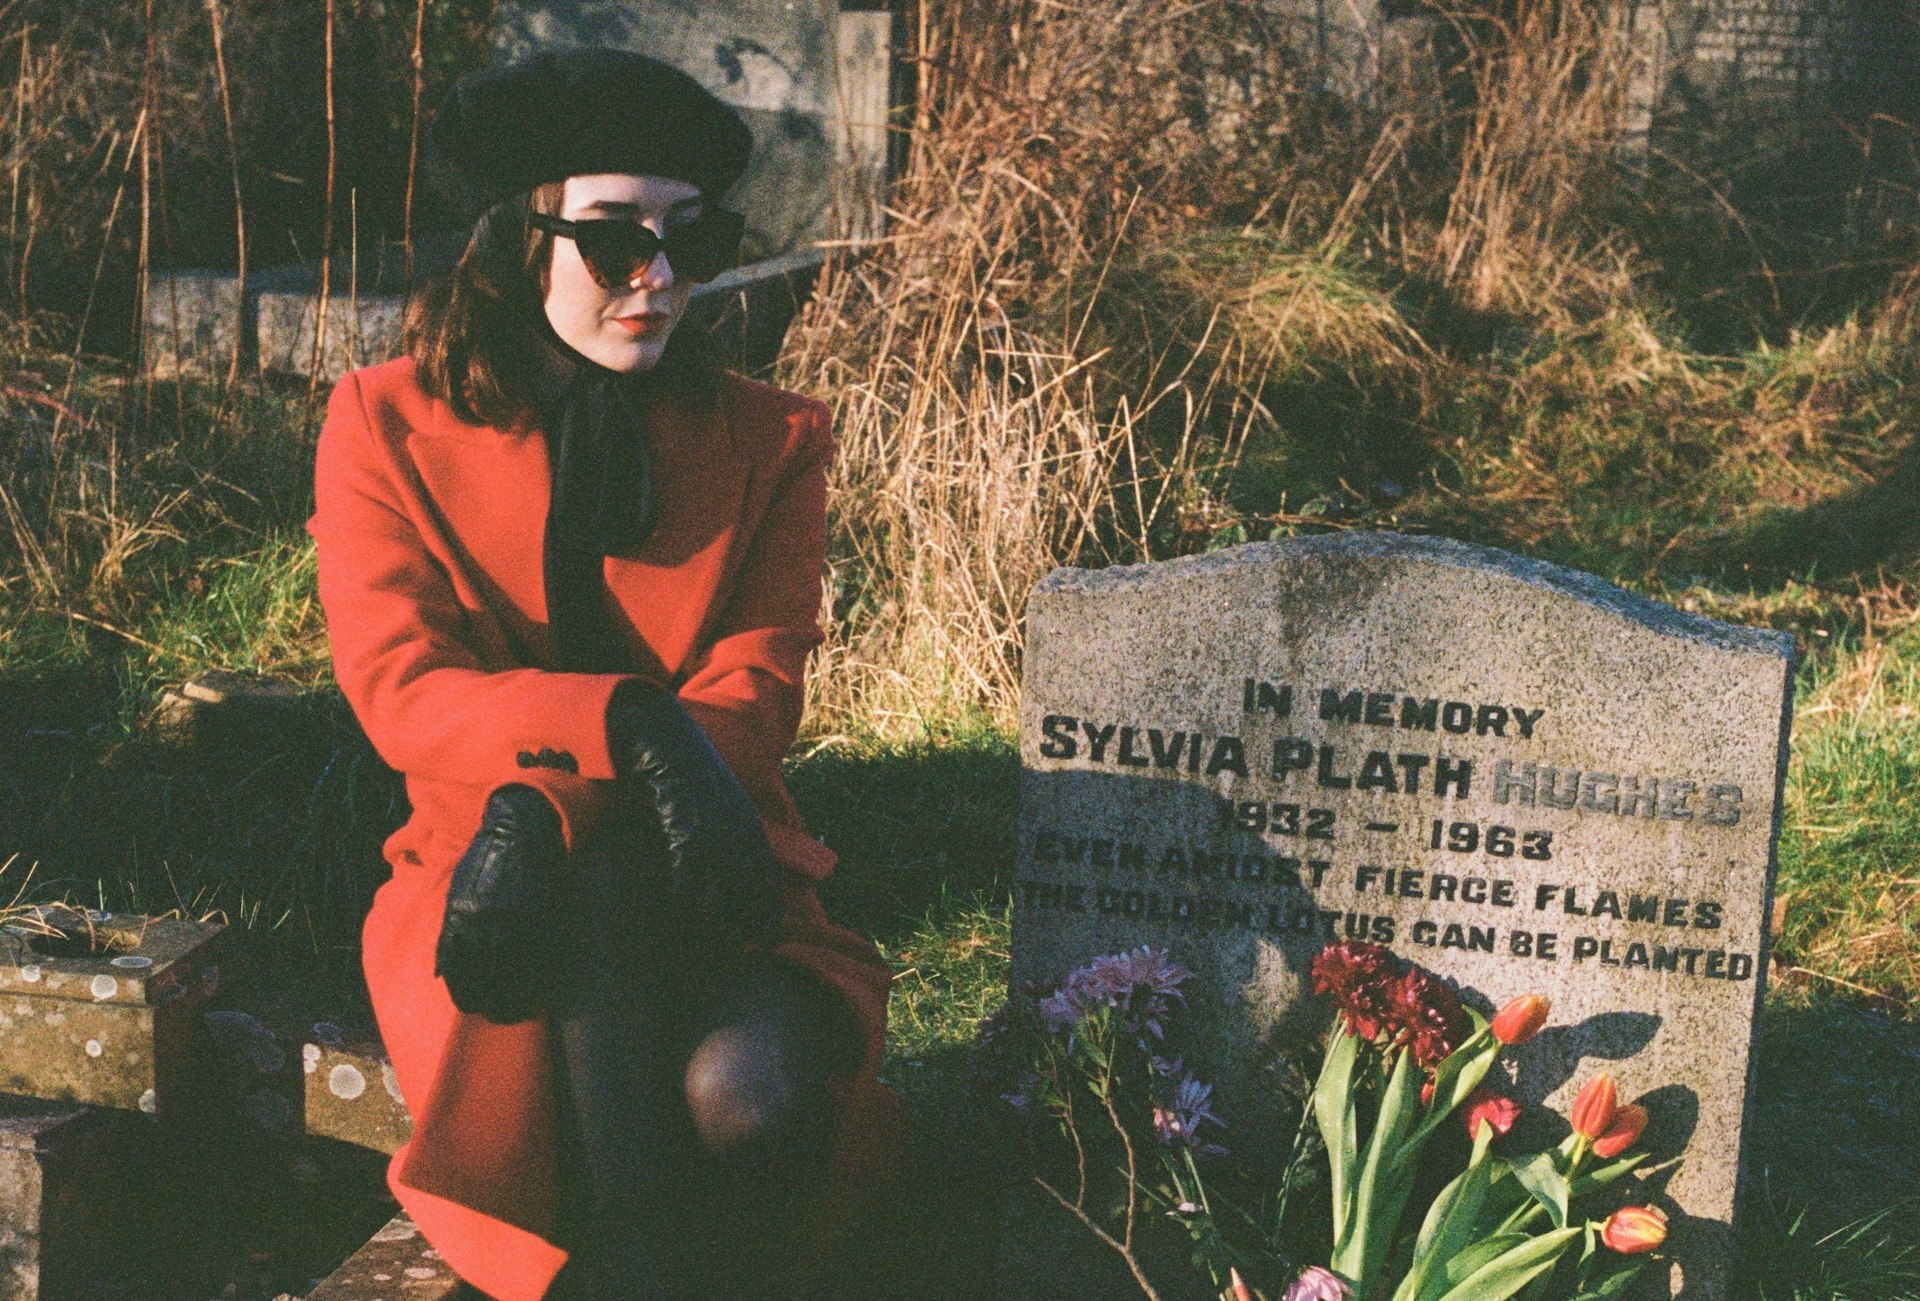 A special pilgrimage to Sylvia Plath's grave